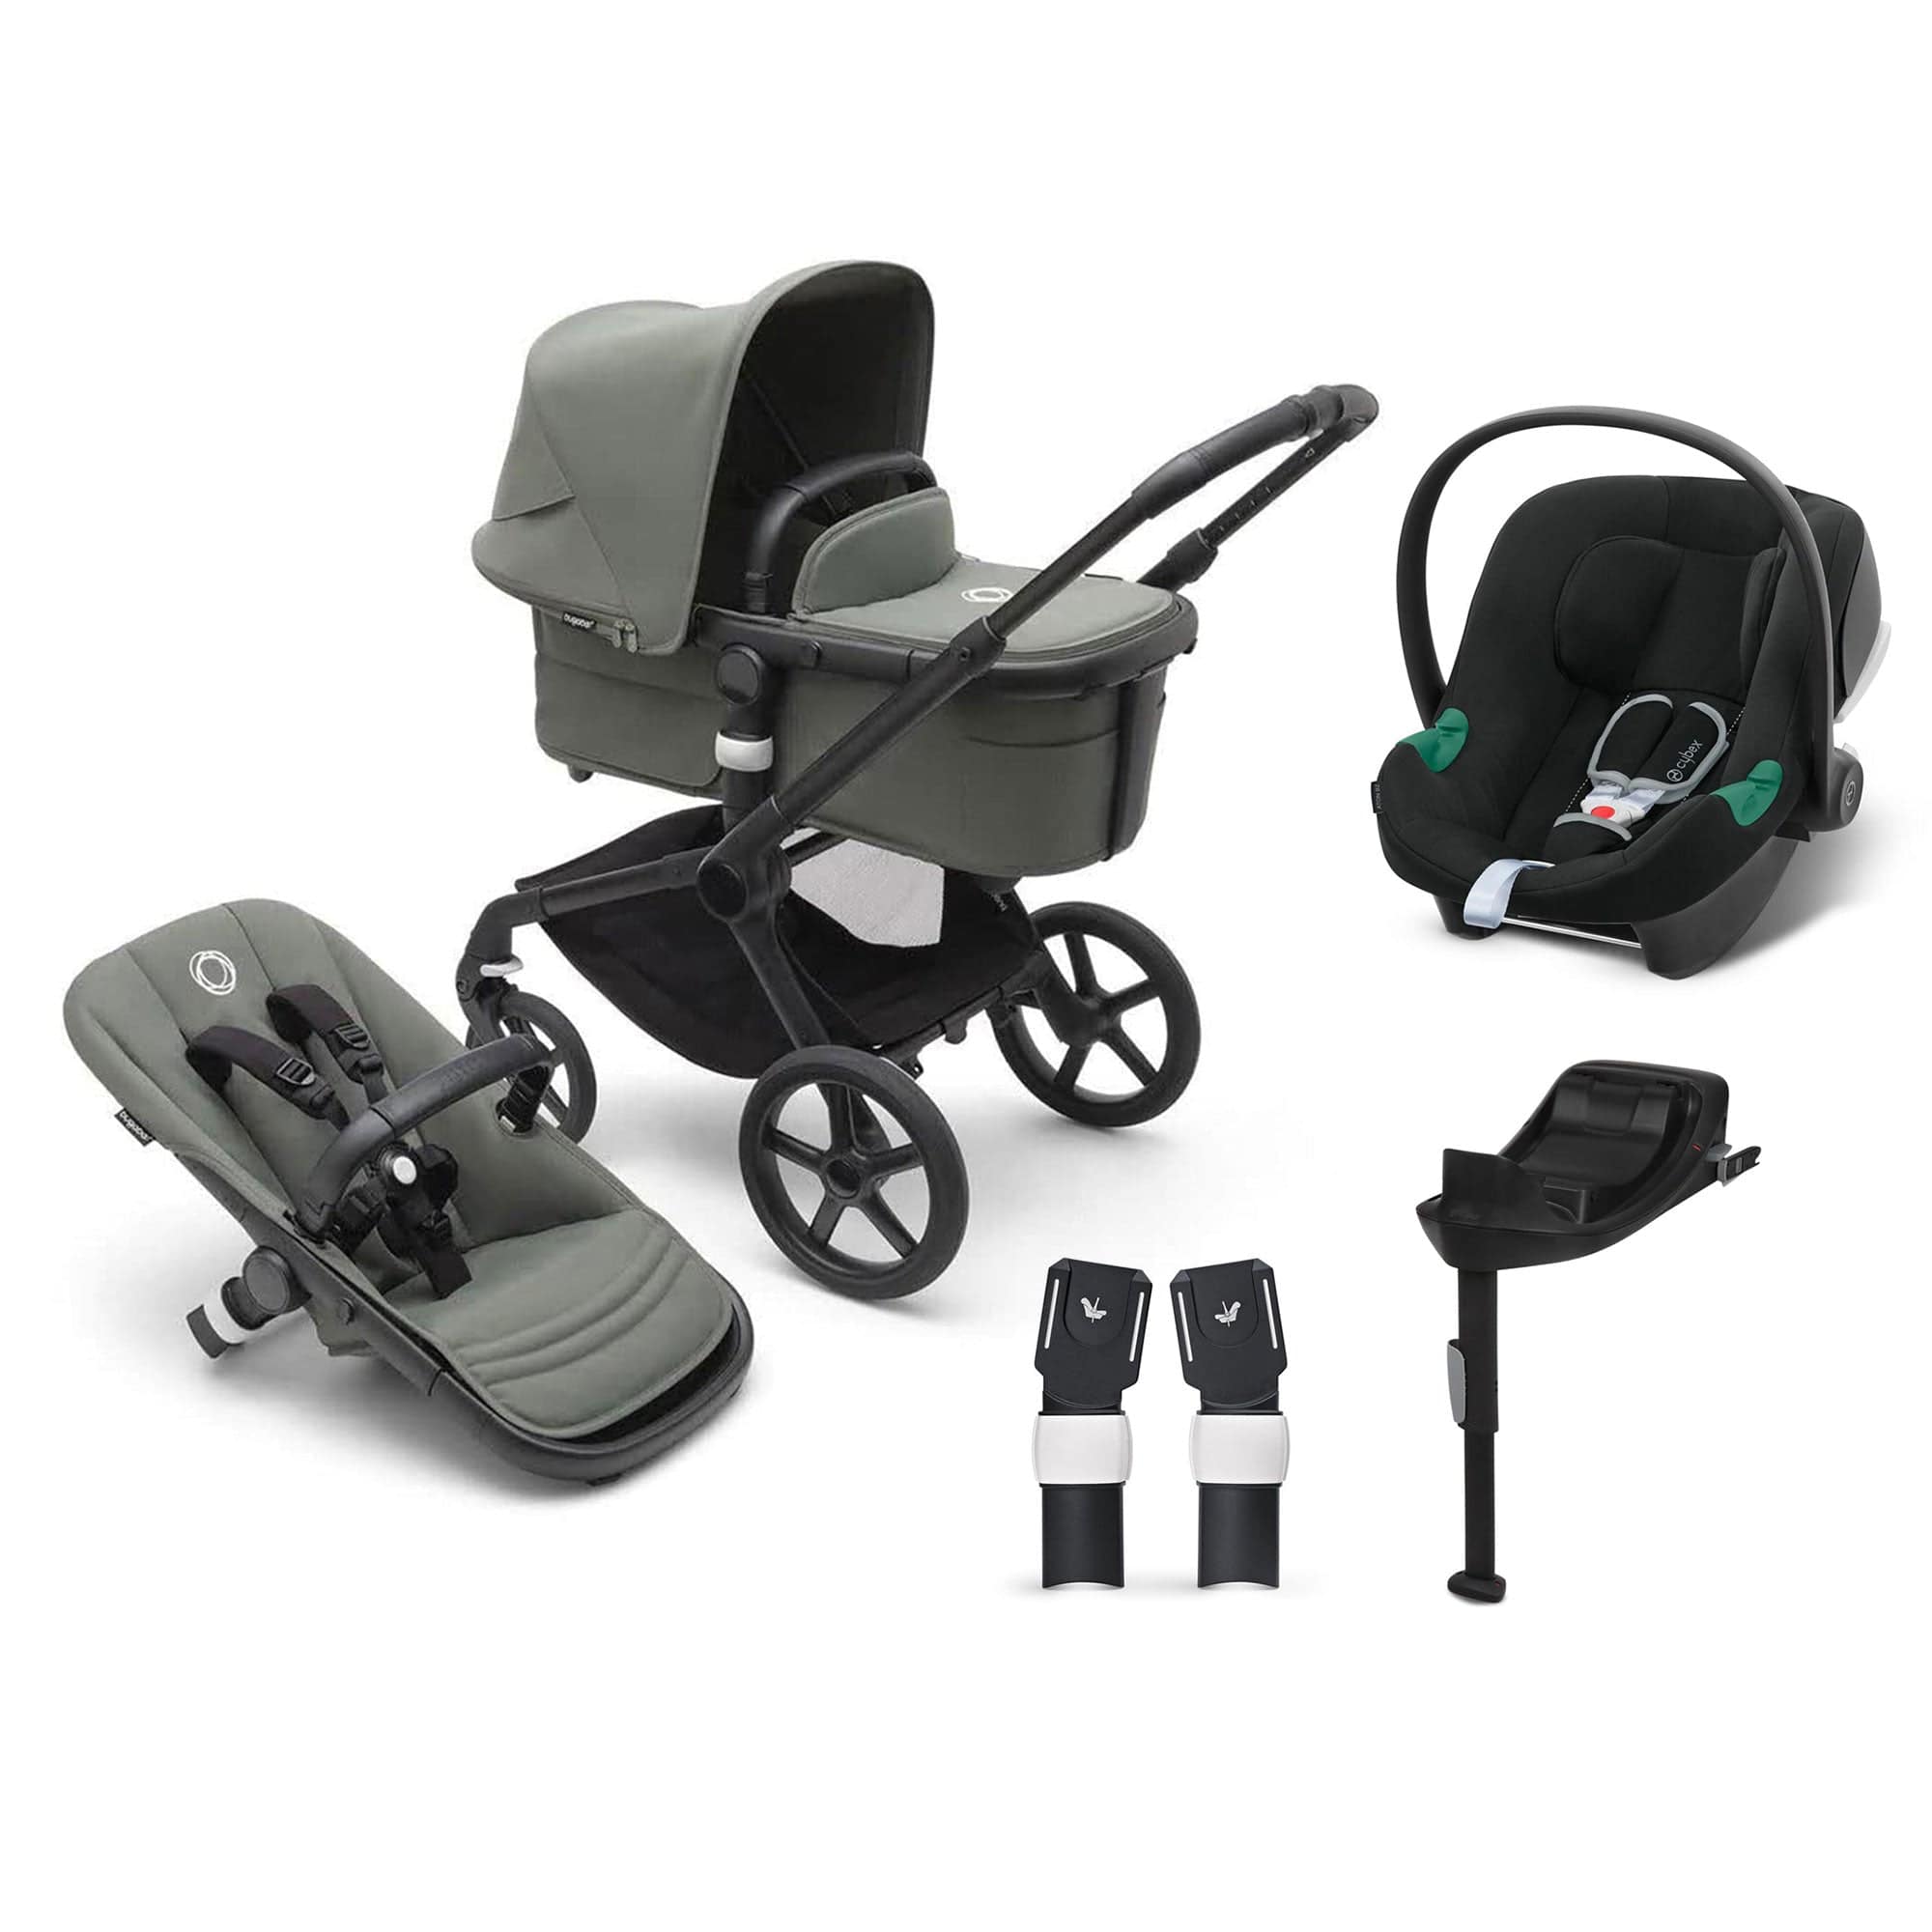 Bugaboo Fox 5 Cybex Travel System - Forest Green Travel Systems 15151-FOR-GRN